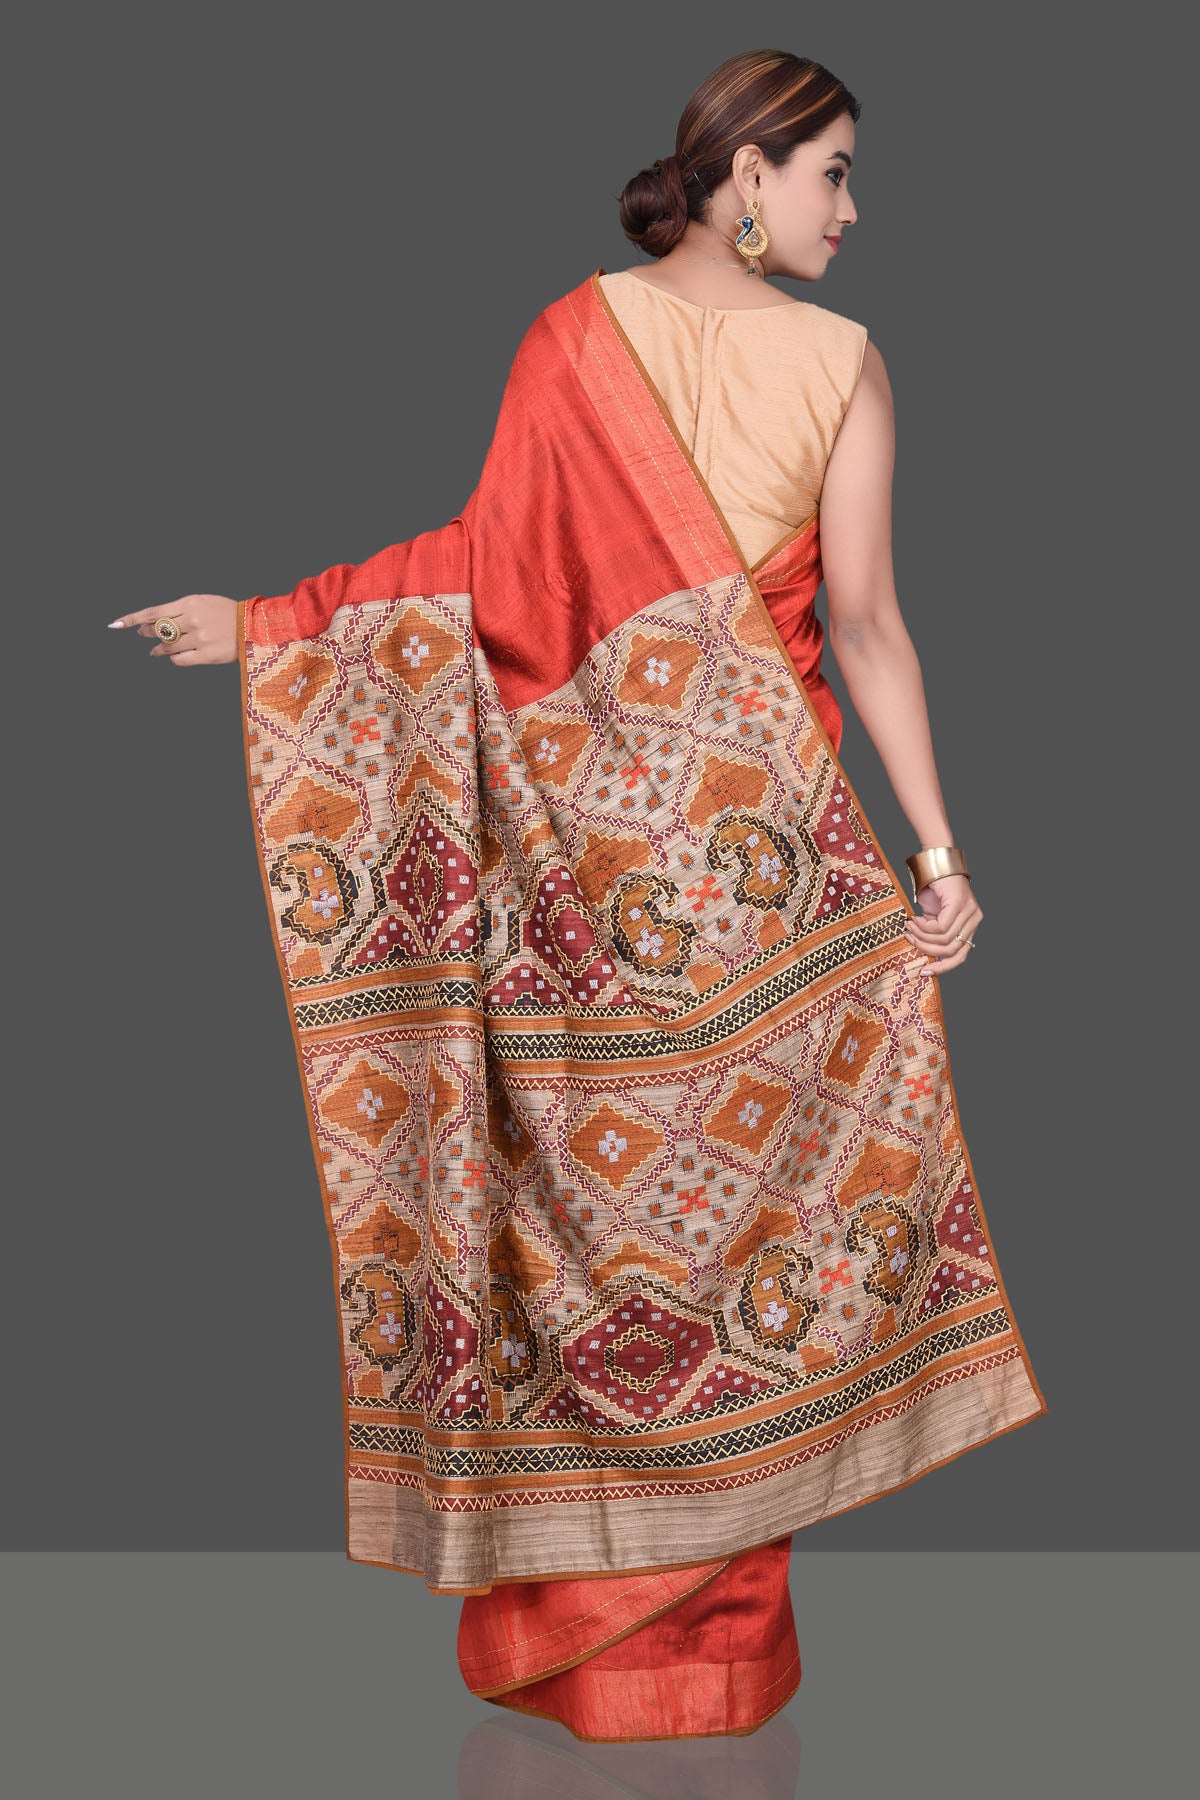 Buy beautiful brick red Kantha work raw silk sari online in USA. Shop beautiful silk sarees, hand embroidered saris, georgette sarees, designer sarees in USA from Pure Elegance Indian fashion store in USA. Shop online now.-back